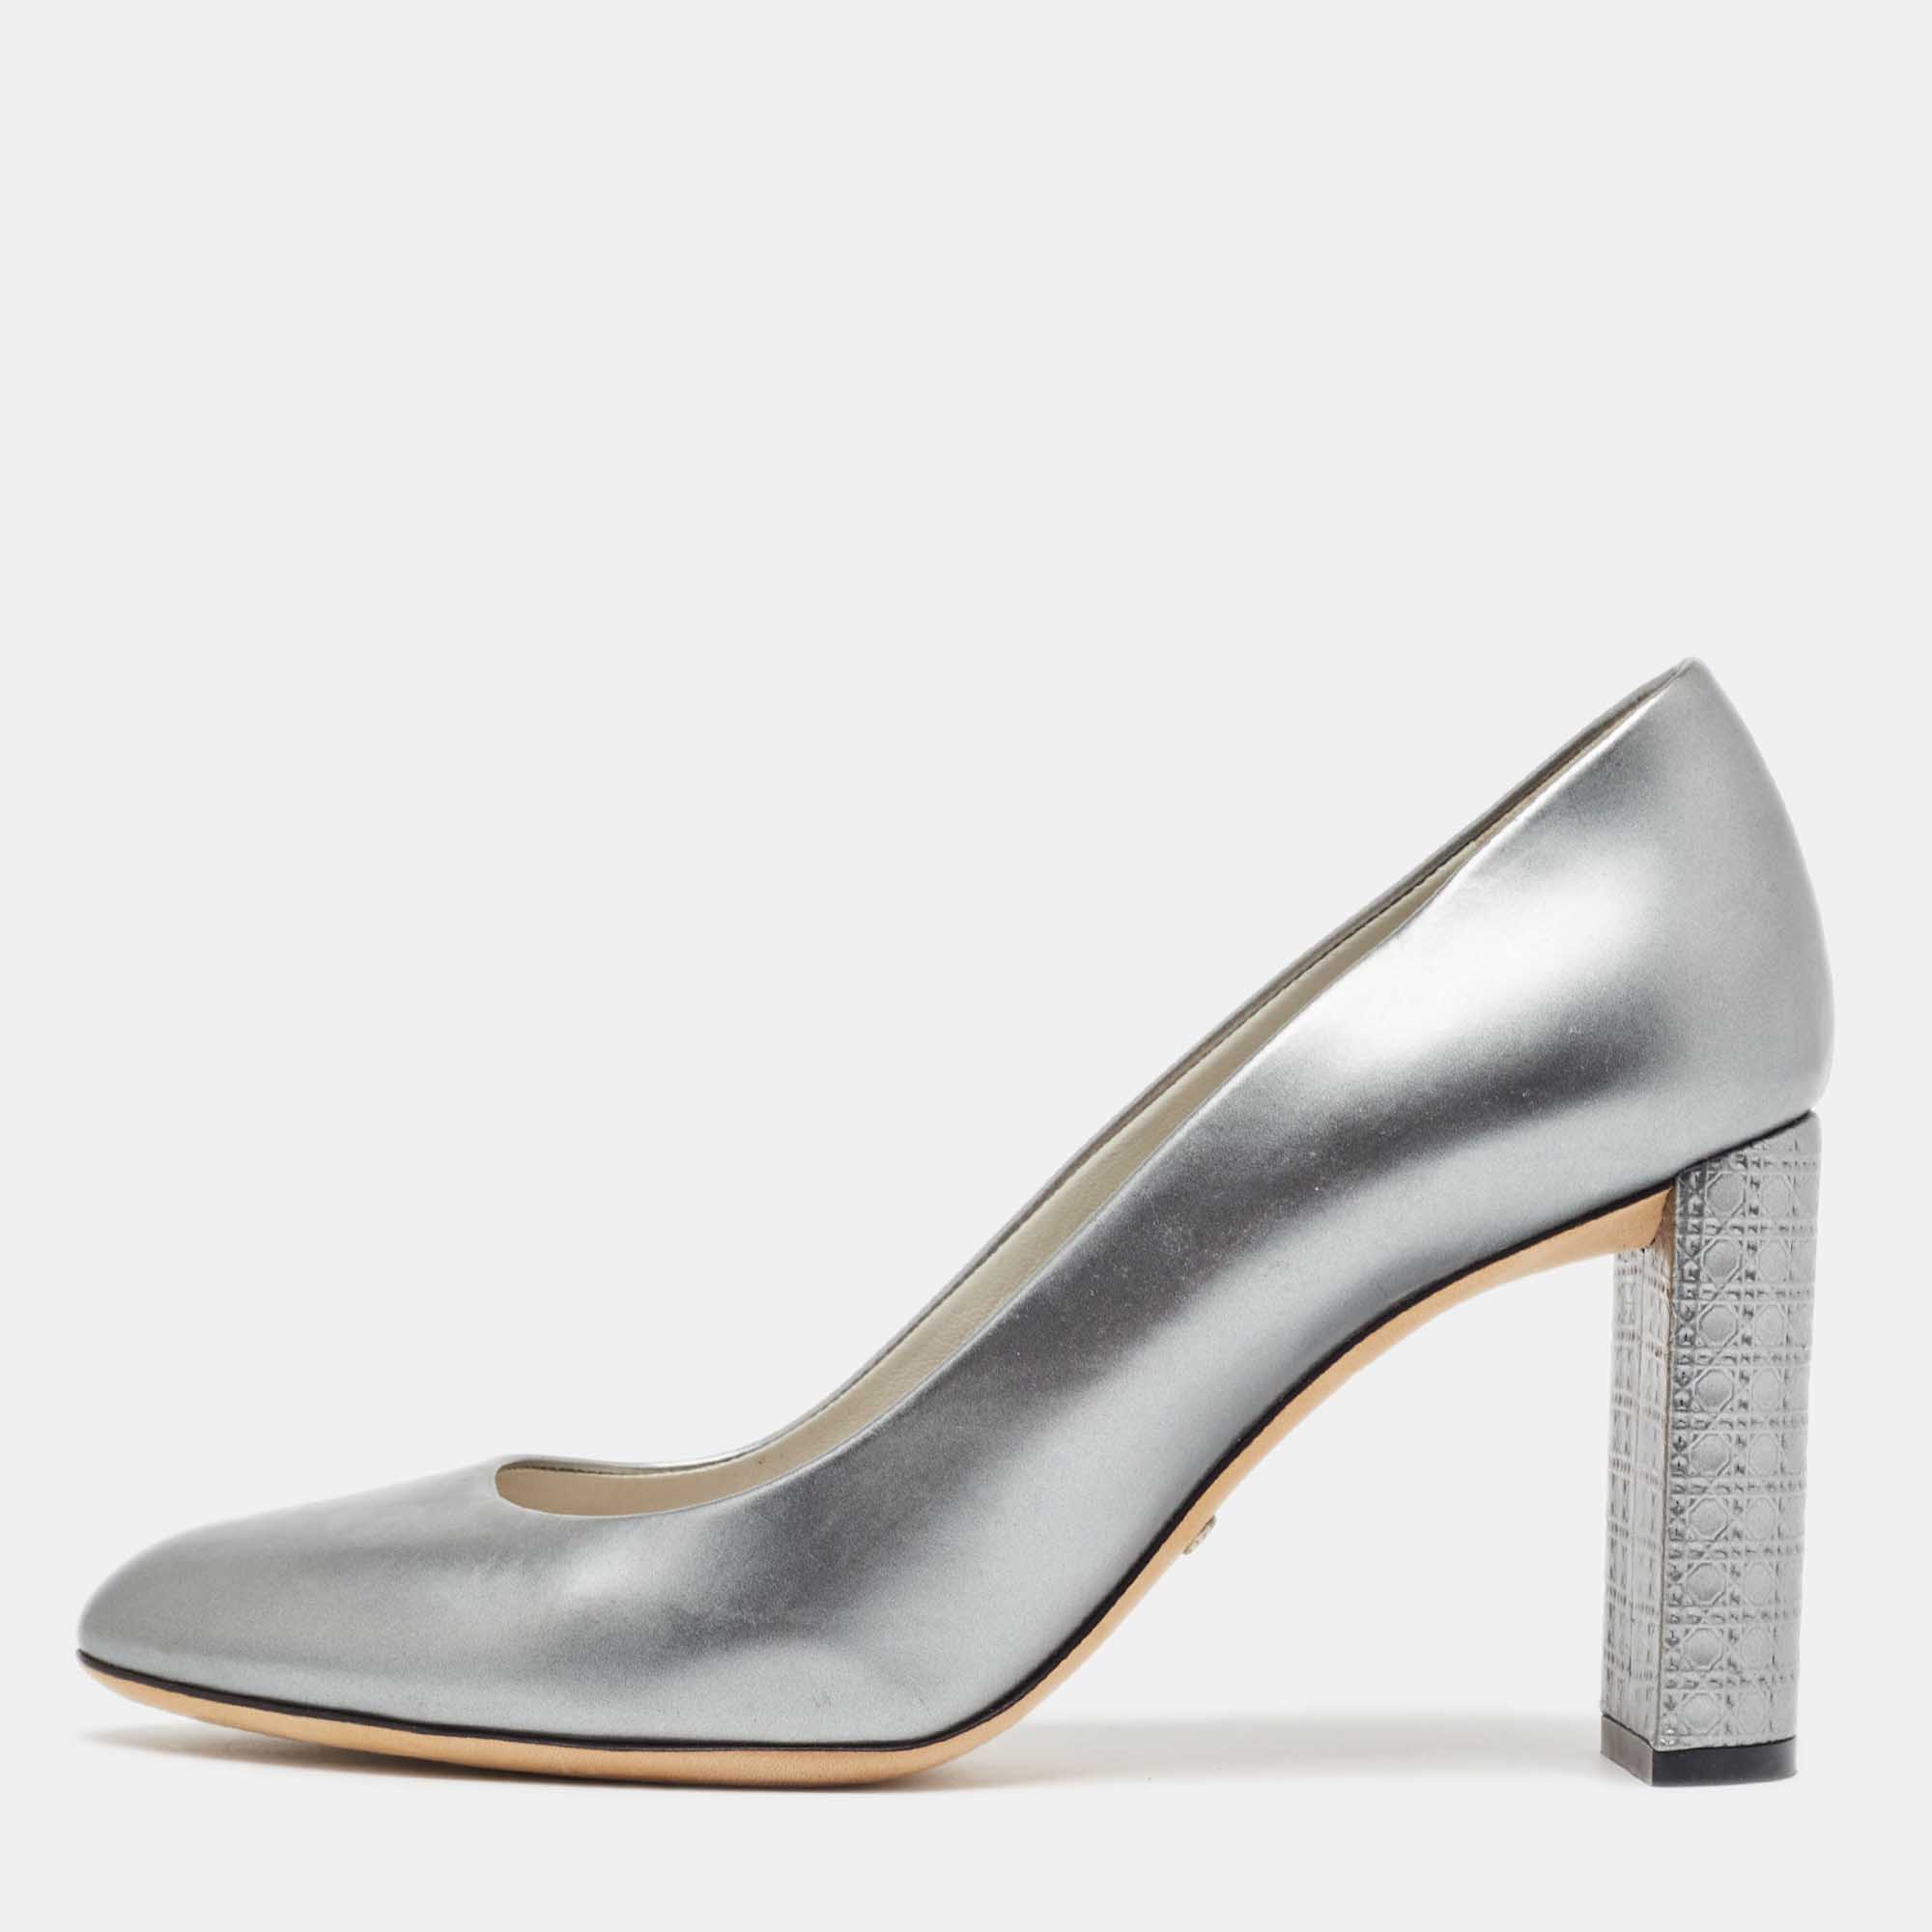 Dior grey leather cannage block heel pumps size 37